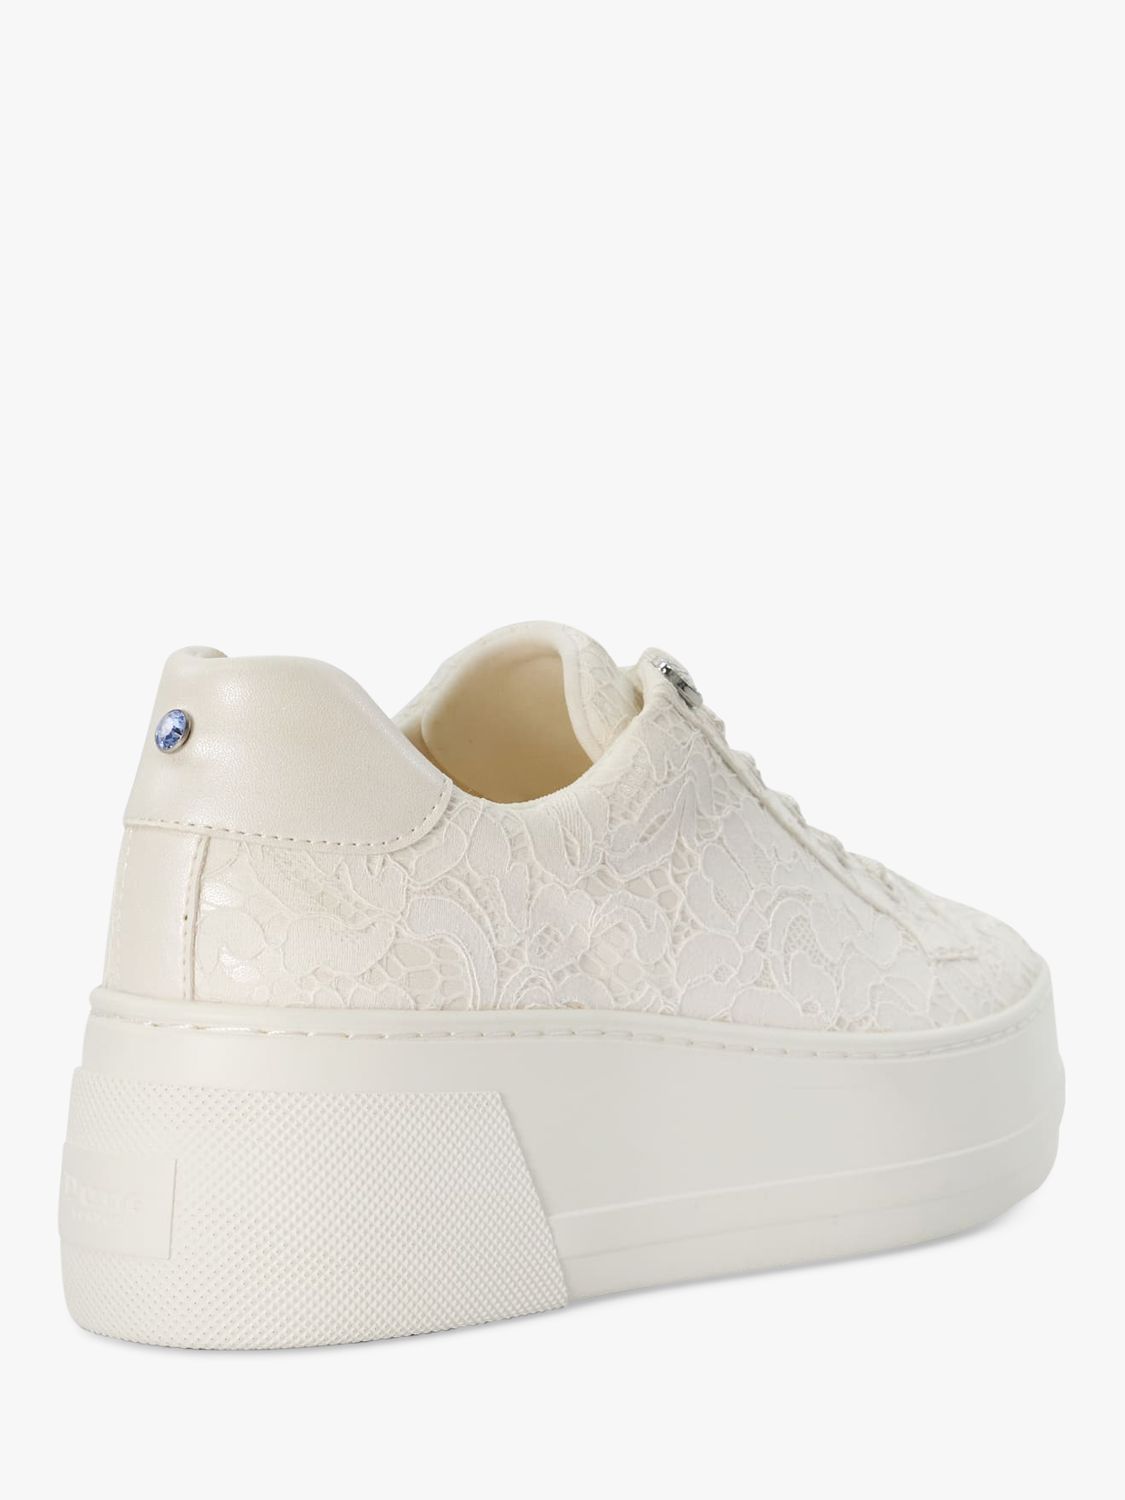 Buy Dune Bridal Collection Embraced Lace Flatform Trainers, Ivory Online at johnlewis.com